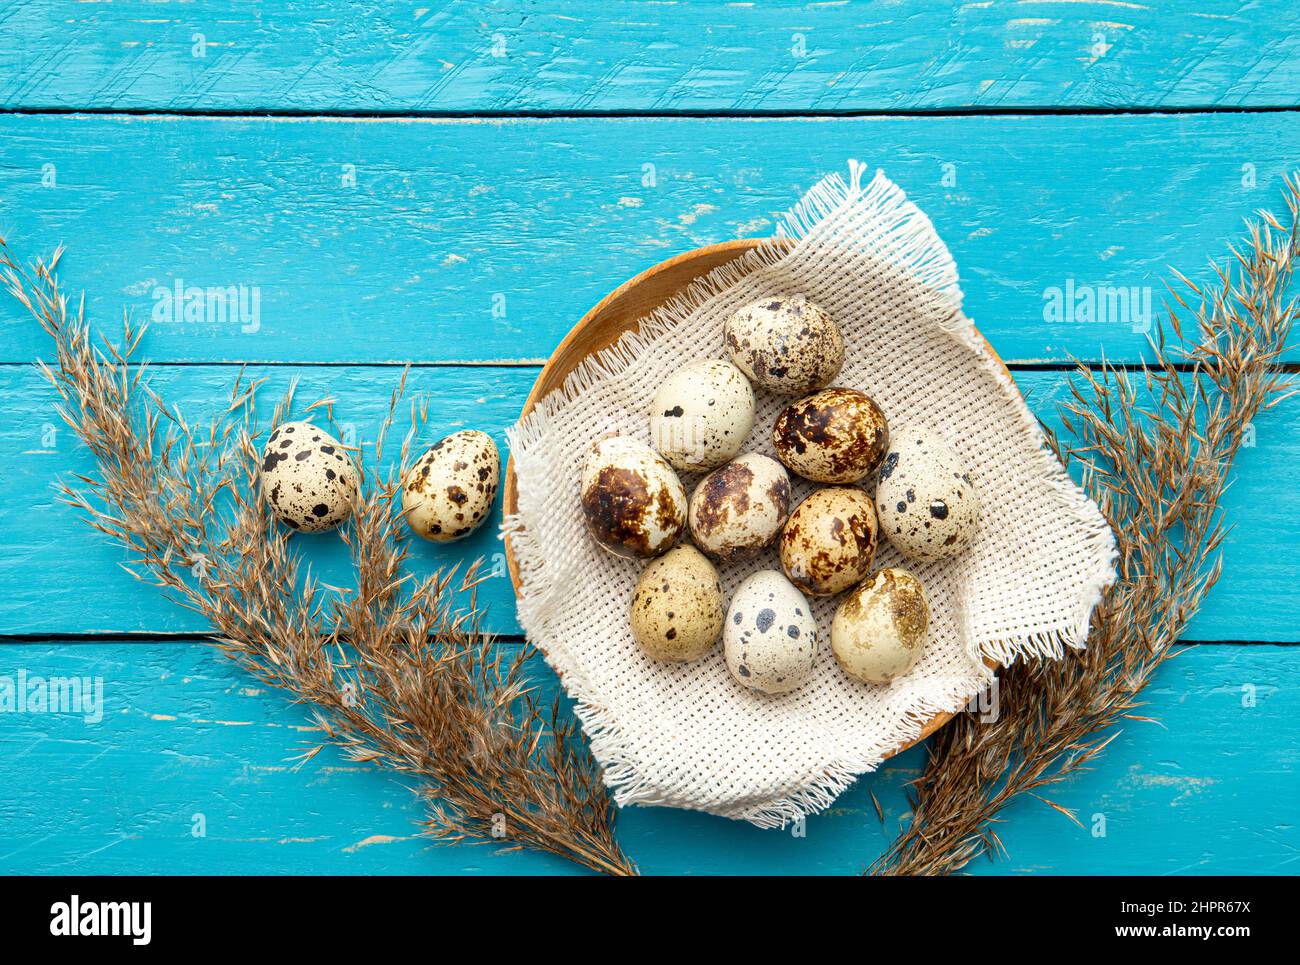 Pile of Quail eggs in natural color wood bowl indoors on blue wooden board background. Flat lay view, lot of copy space. Healthy food concept. Stock Photo